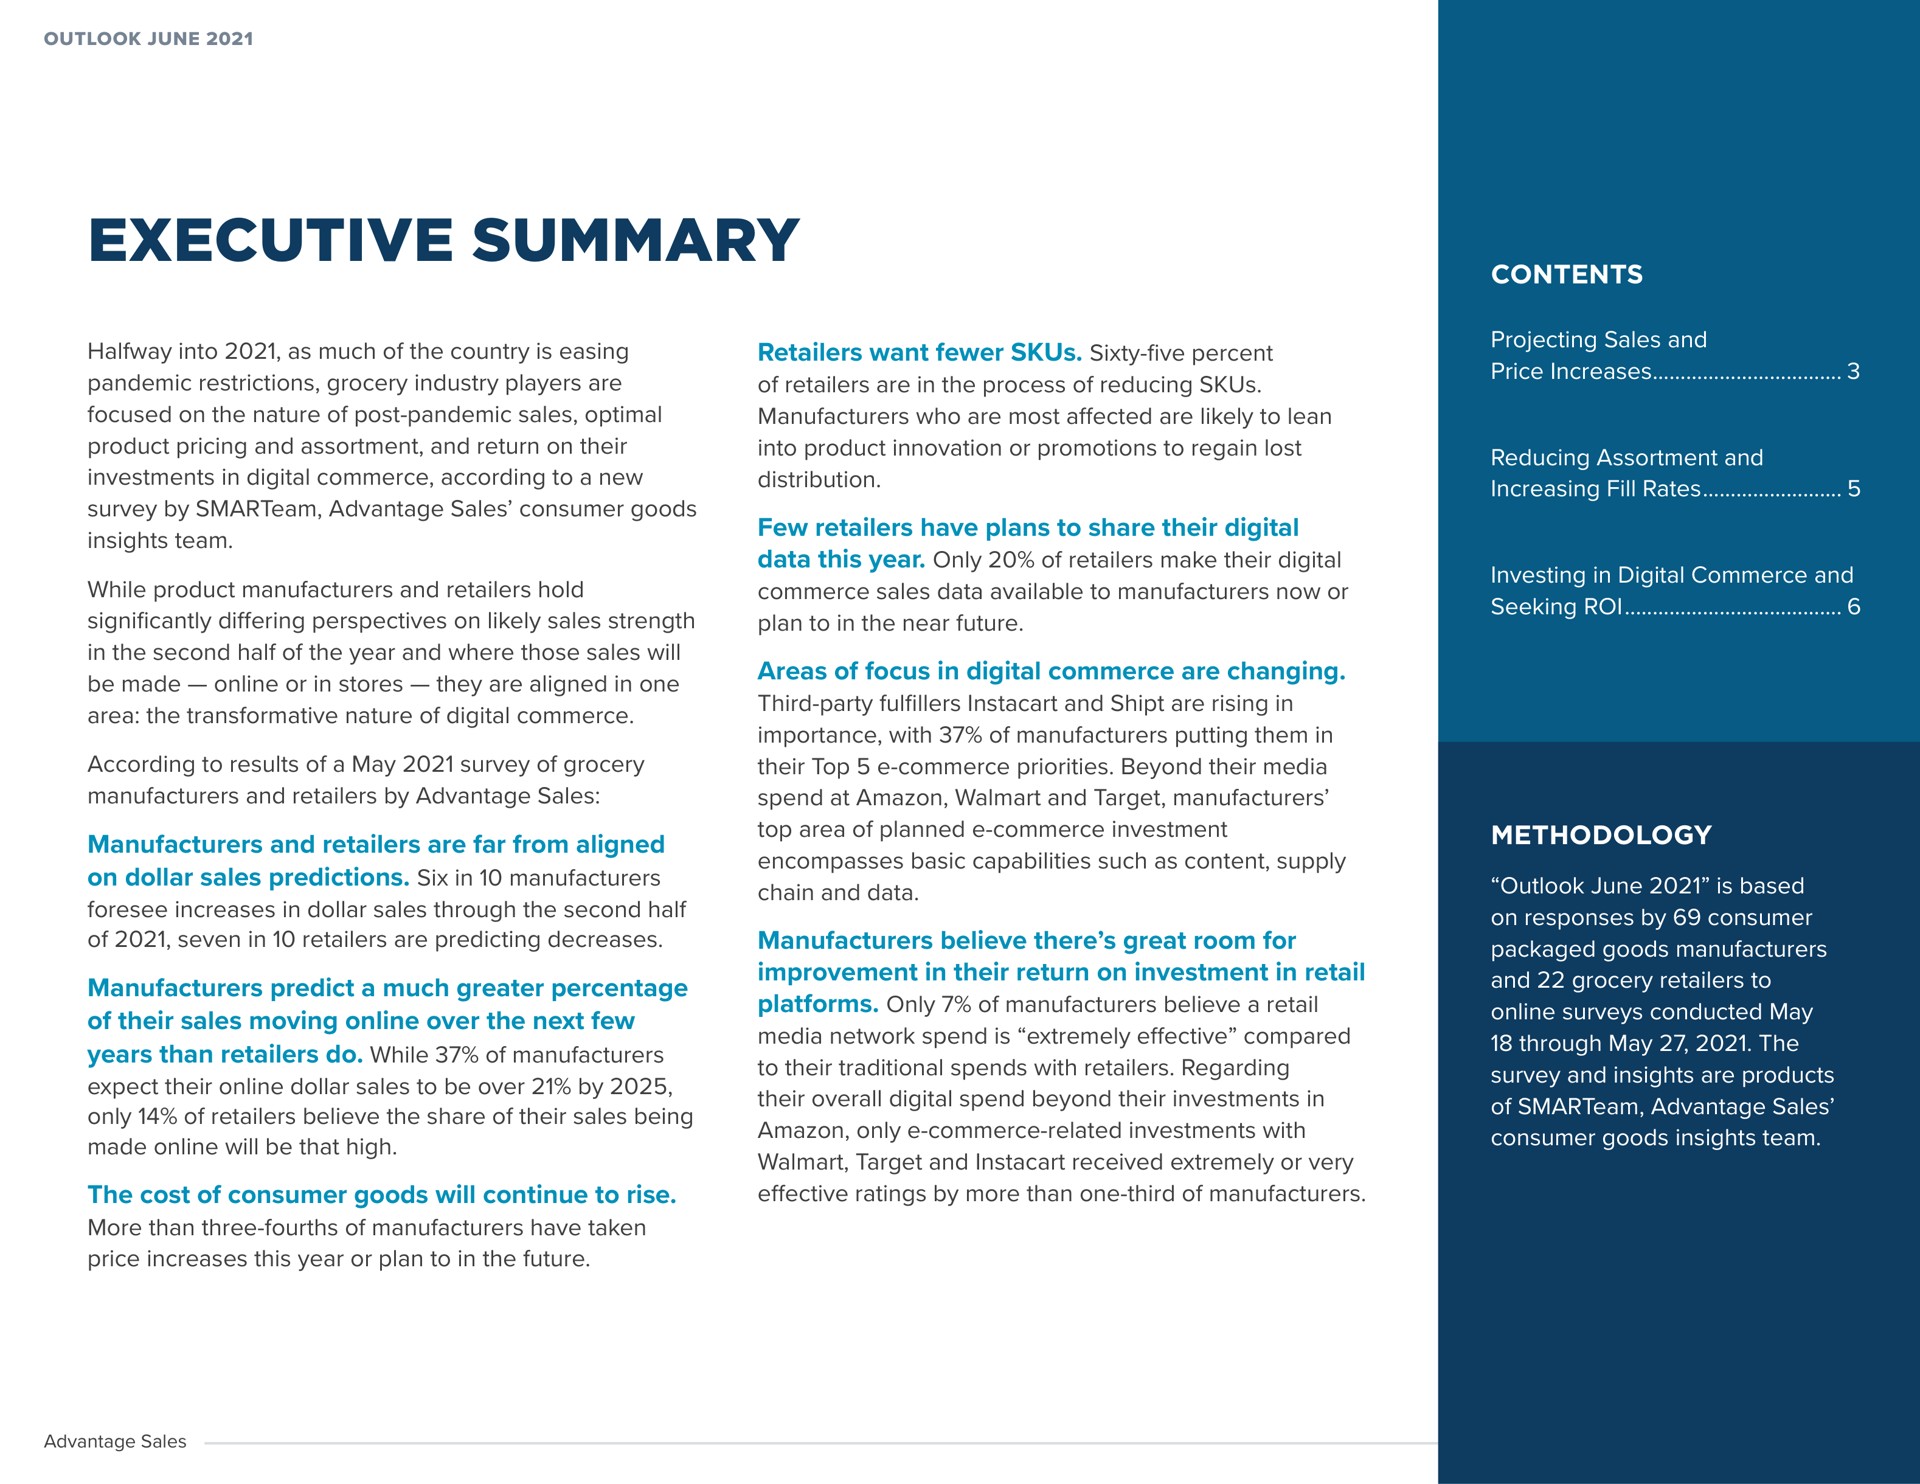 executive summary halfway into as much of the country is easing pandemic restrictions grocery industry players are focused on the nature of post pandemic sales optimal product pricing and assortment and return on their investments in digital commerce according to a new survey by advantage sales consumer goods insights team while product manufacturers and retailers hold significantly differing perspectives on likely sales strength in the second half of the year and where those sales will be made or in stores they are aligned in one area the transformative nature of digital commerce according to results of a may survey of grocery manufacturers and retailers by advantage sales manufacturers and retailers are far from aligned on dollar sales predictions six in manufacturers foresee increases in dollar sales through the second half of seven in retailers are predicting decreases manufacturers predict a much greater percentage of their sales moving over the next few years than retailers do while of manufacturers expect their dollar sales to be over by only of retailers believe the share of their sales being made will be that high the cost of consumer goods will continue to rise more than three fourths of manufacturers have taken price increases this year or plan to in the future retailers want sixty five percent of retailers are in the process of reducing manufacturers who are most affected are likely to lean into product innovation or promotions to regain lost distribution few retailers have plans to share their digital data this year only of retailers make their digital commerce sales data available to manufacturers now or plan to in the near future areas of focus in digital commerce are changing third party and are rising in importance with of manufacturers putting them in their top commerce priorities beyond their media spend at and target manufacturers top area of planned commerce investment encompasses basic capabilities such as content supply chain and data manufacturers believe there great room for improvement in their return on investment in retail platforms only of manufacturers believe a retail media network spend is extremely effective compared to their traditional spends with retailers regarding their overall digital spend beyond their investments in only commerce related investments with target and received extremely or very effective ratings by more than one third of manufacturers contents projecting sales and price increases reducing assortment and increasing fill rates investing in digital commerce and seeking roi methodology outlook june is based on responses by consumer packaged goods manufacturers and grocery retailers to surveys conducted may through may the survey and insights are products of advantage sales consumer goods insights team | Advantage Solutions